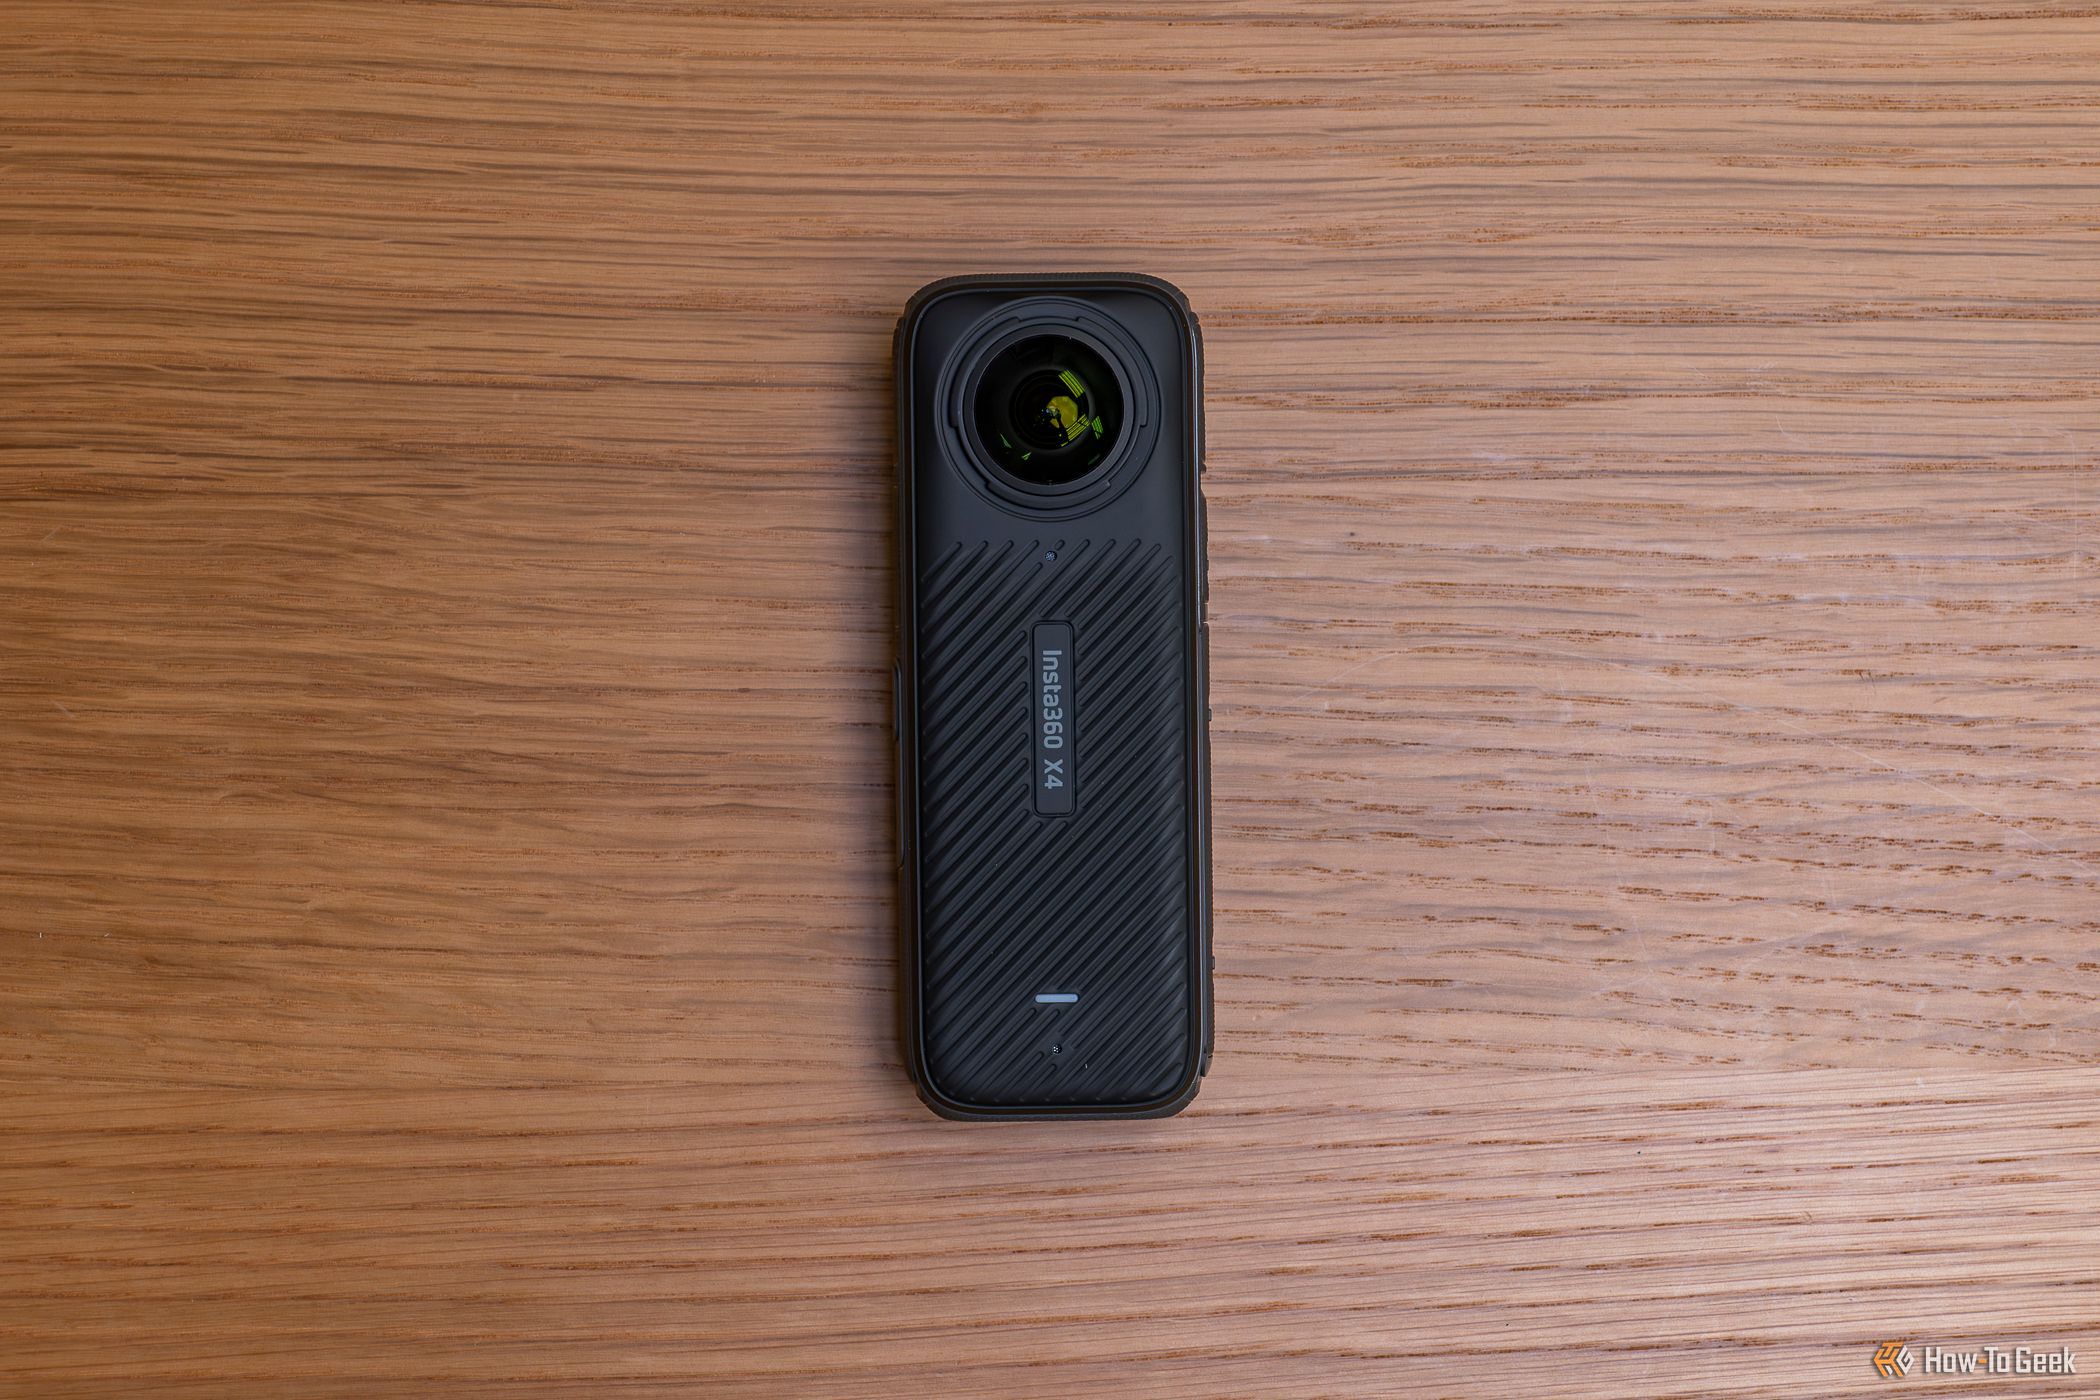 The back of the Insta360 X4